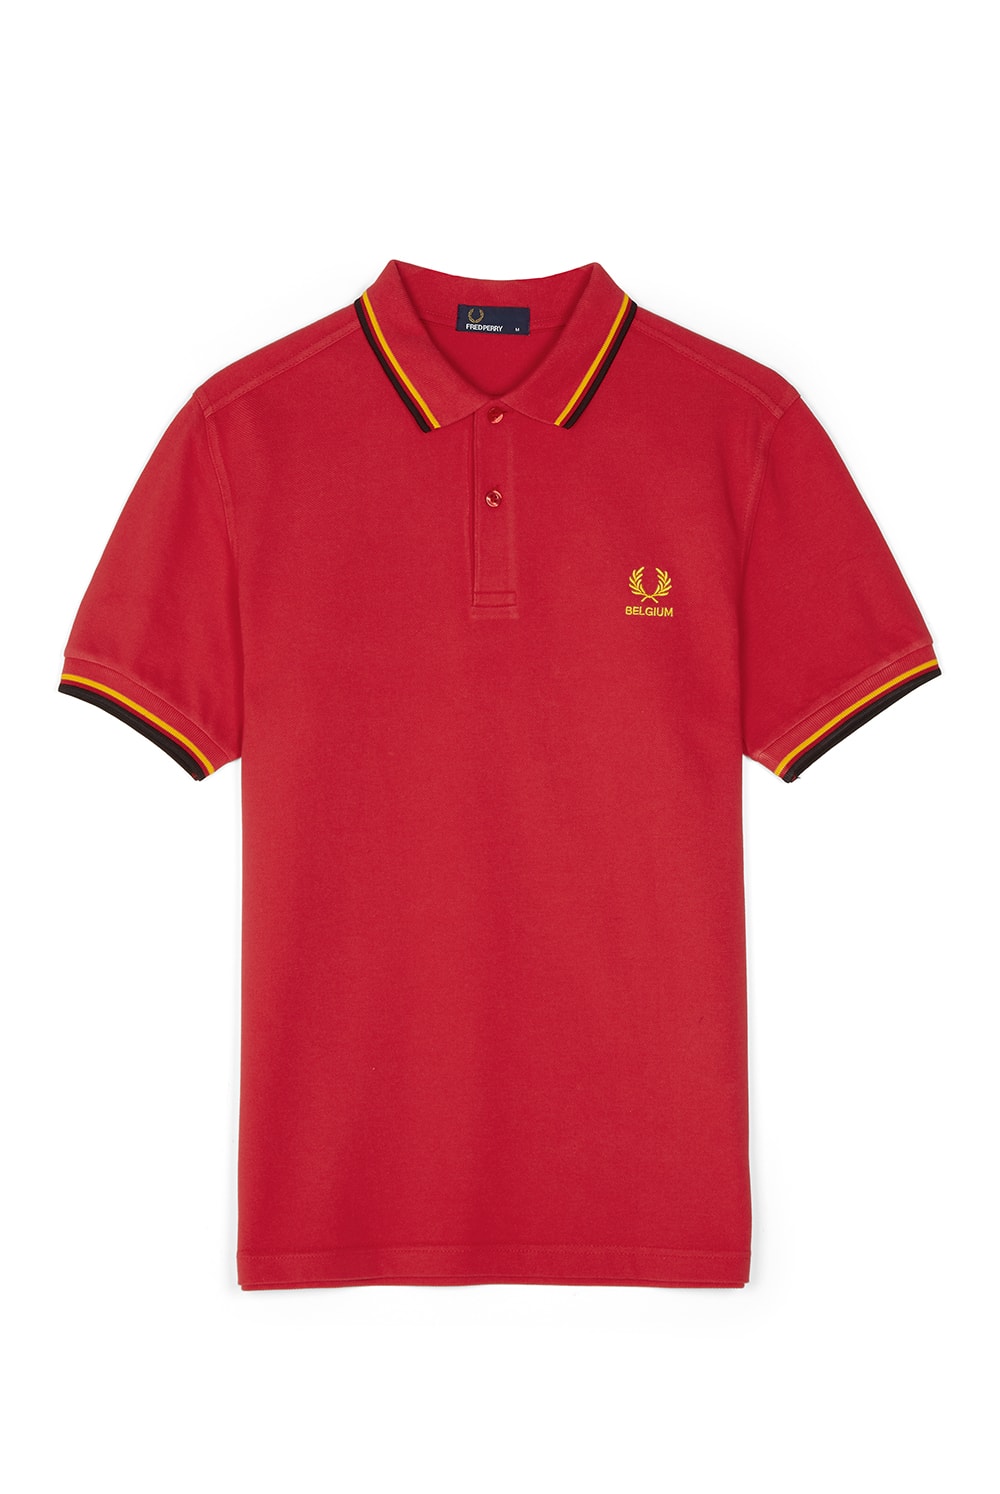 Fred Perry FIFA World Cup Country Shirts collection polo soccer Russia England Brazil Belgium France Germany Spain Portugal Sweden Japan South Korea